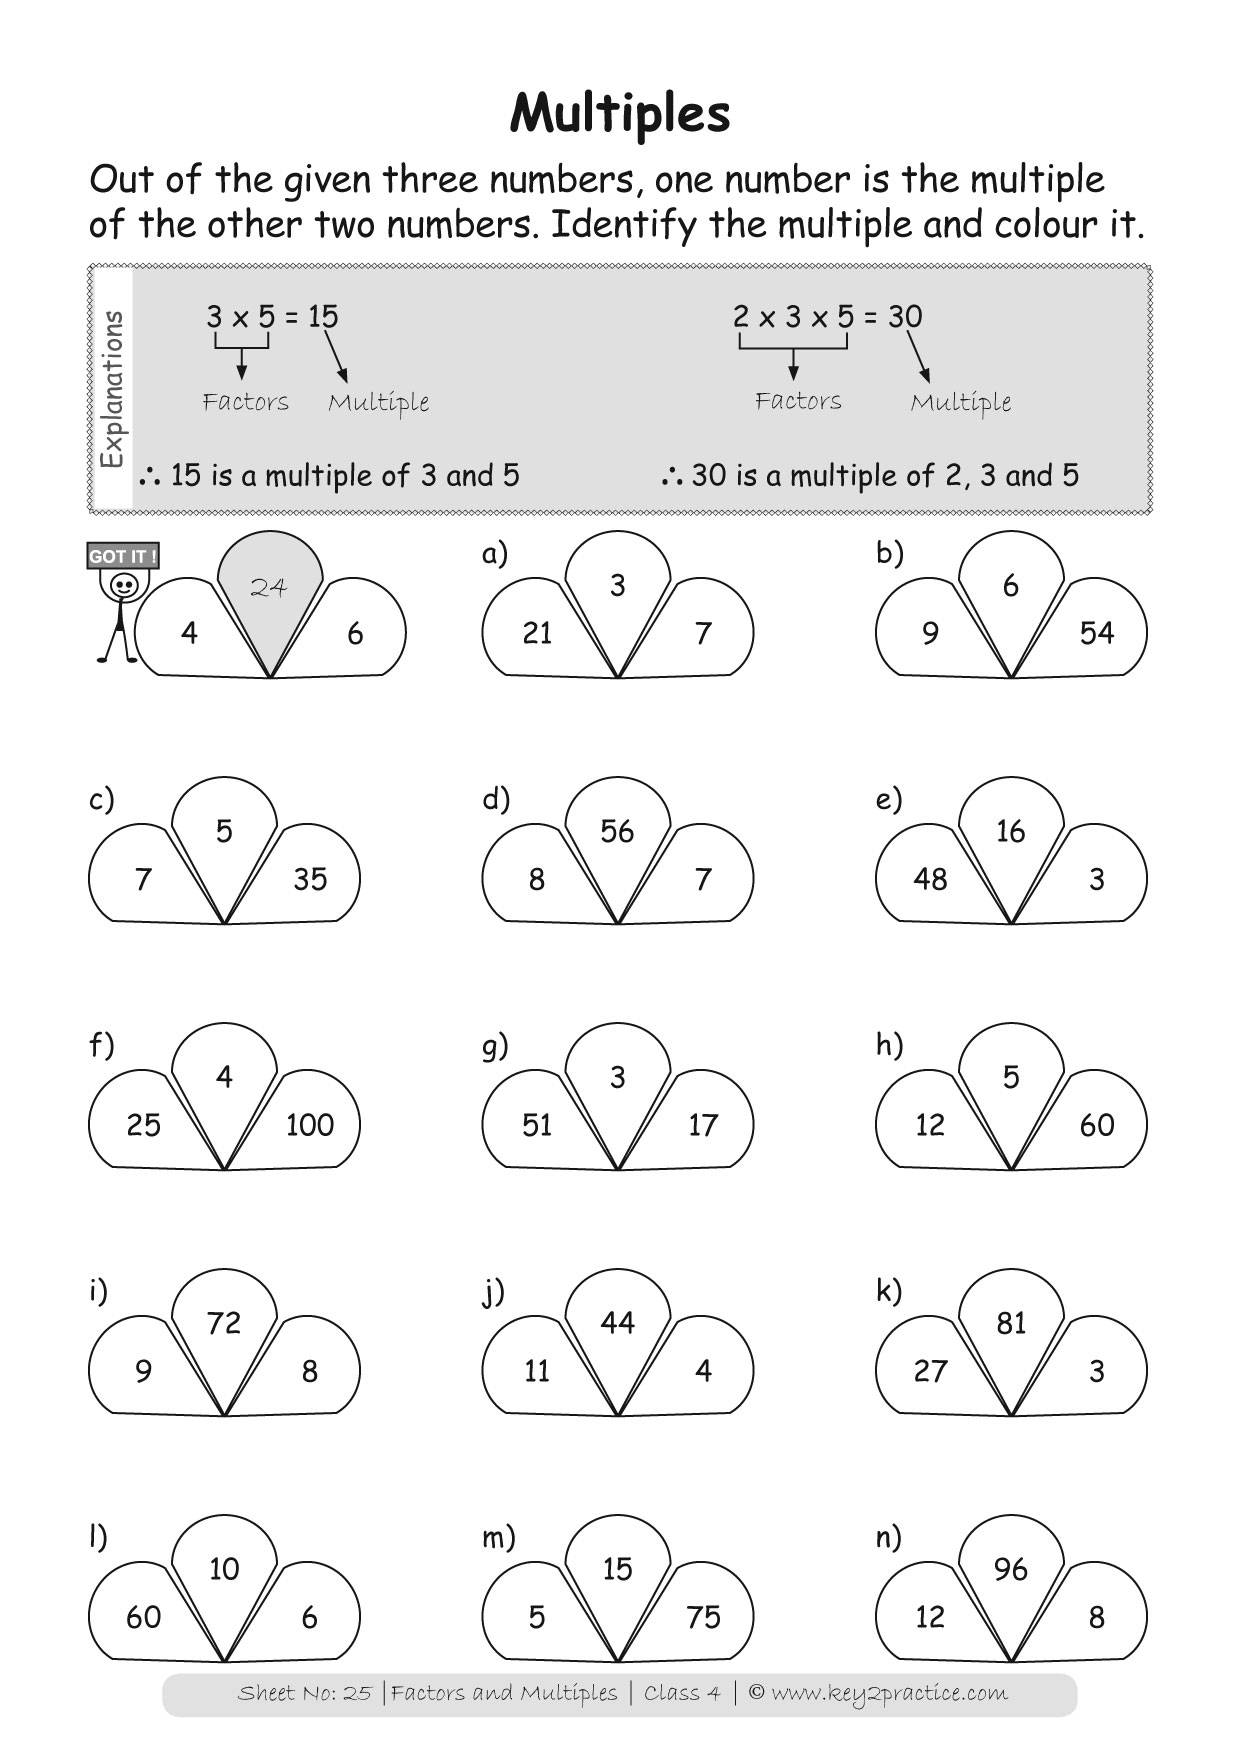 multiples-and-factors-multiplication-by-urbrainy